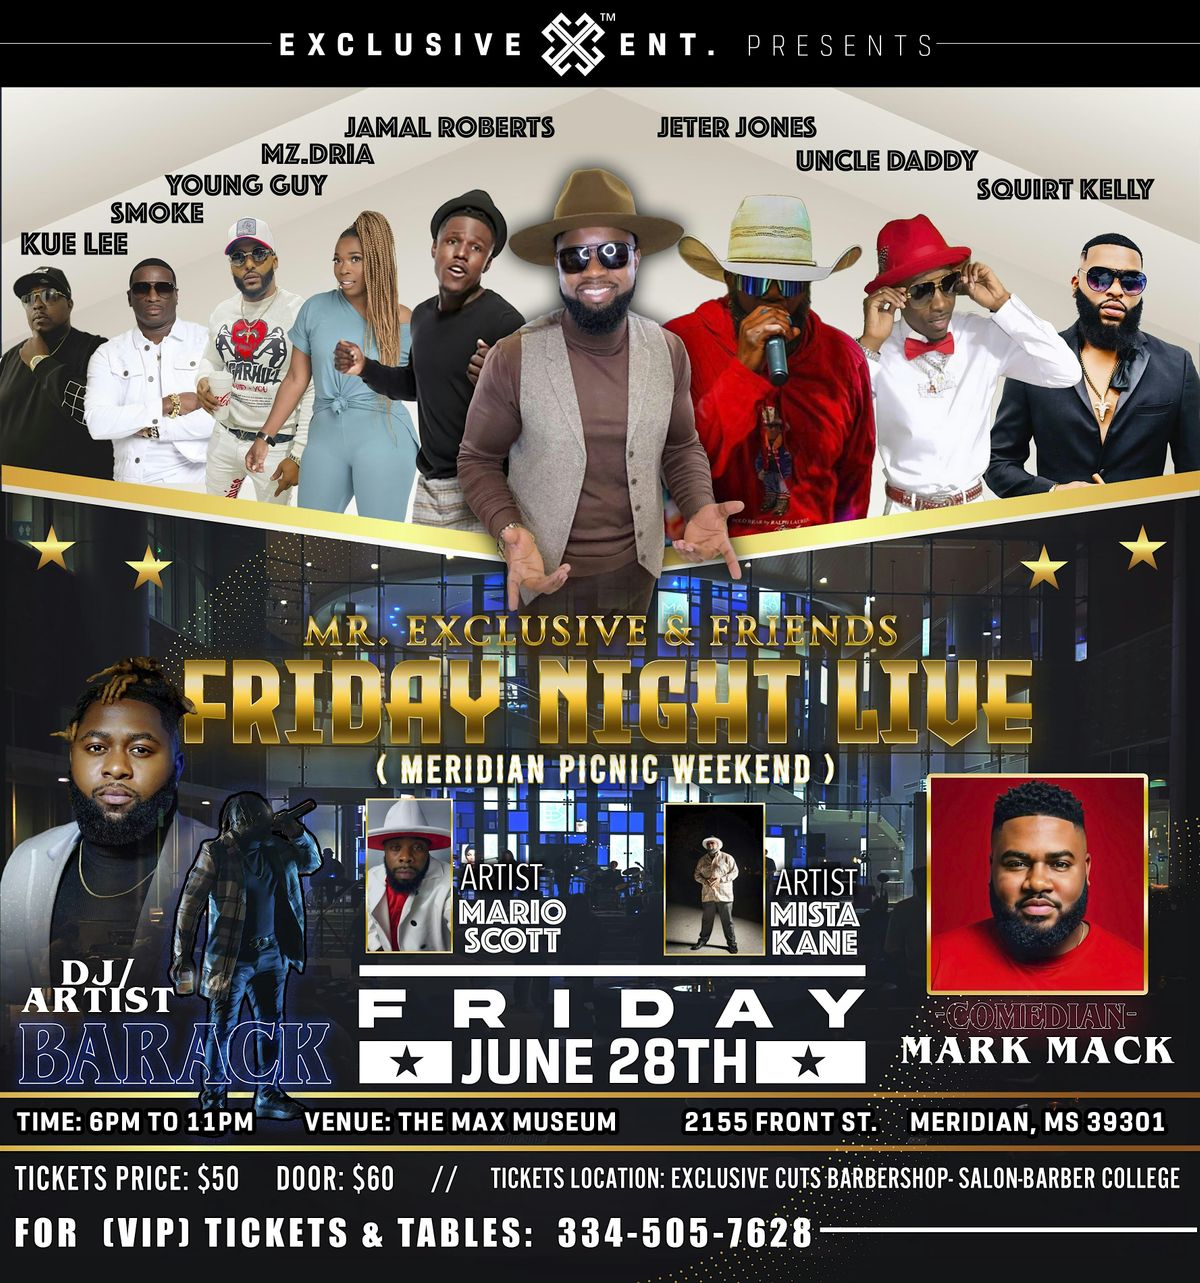 Mr. Exclusive & Friends Friday Night Live ( Meridian Picnic Weekend)